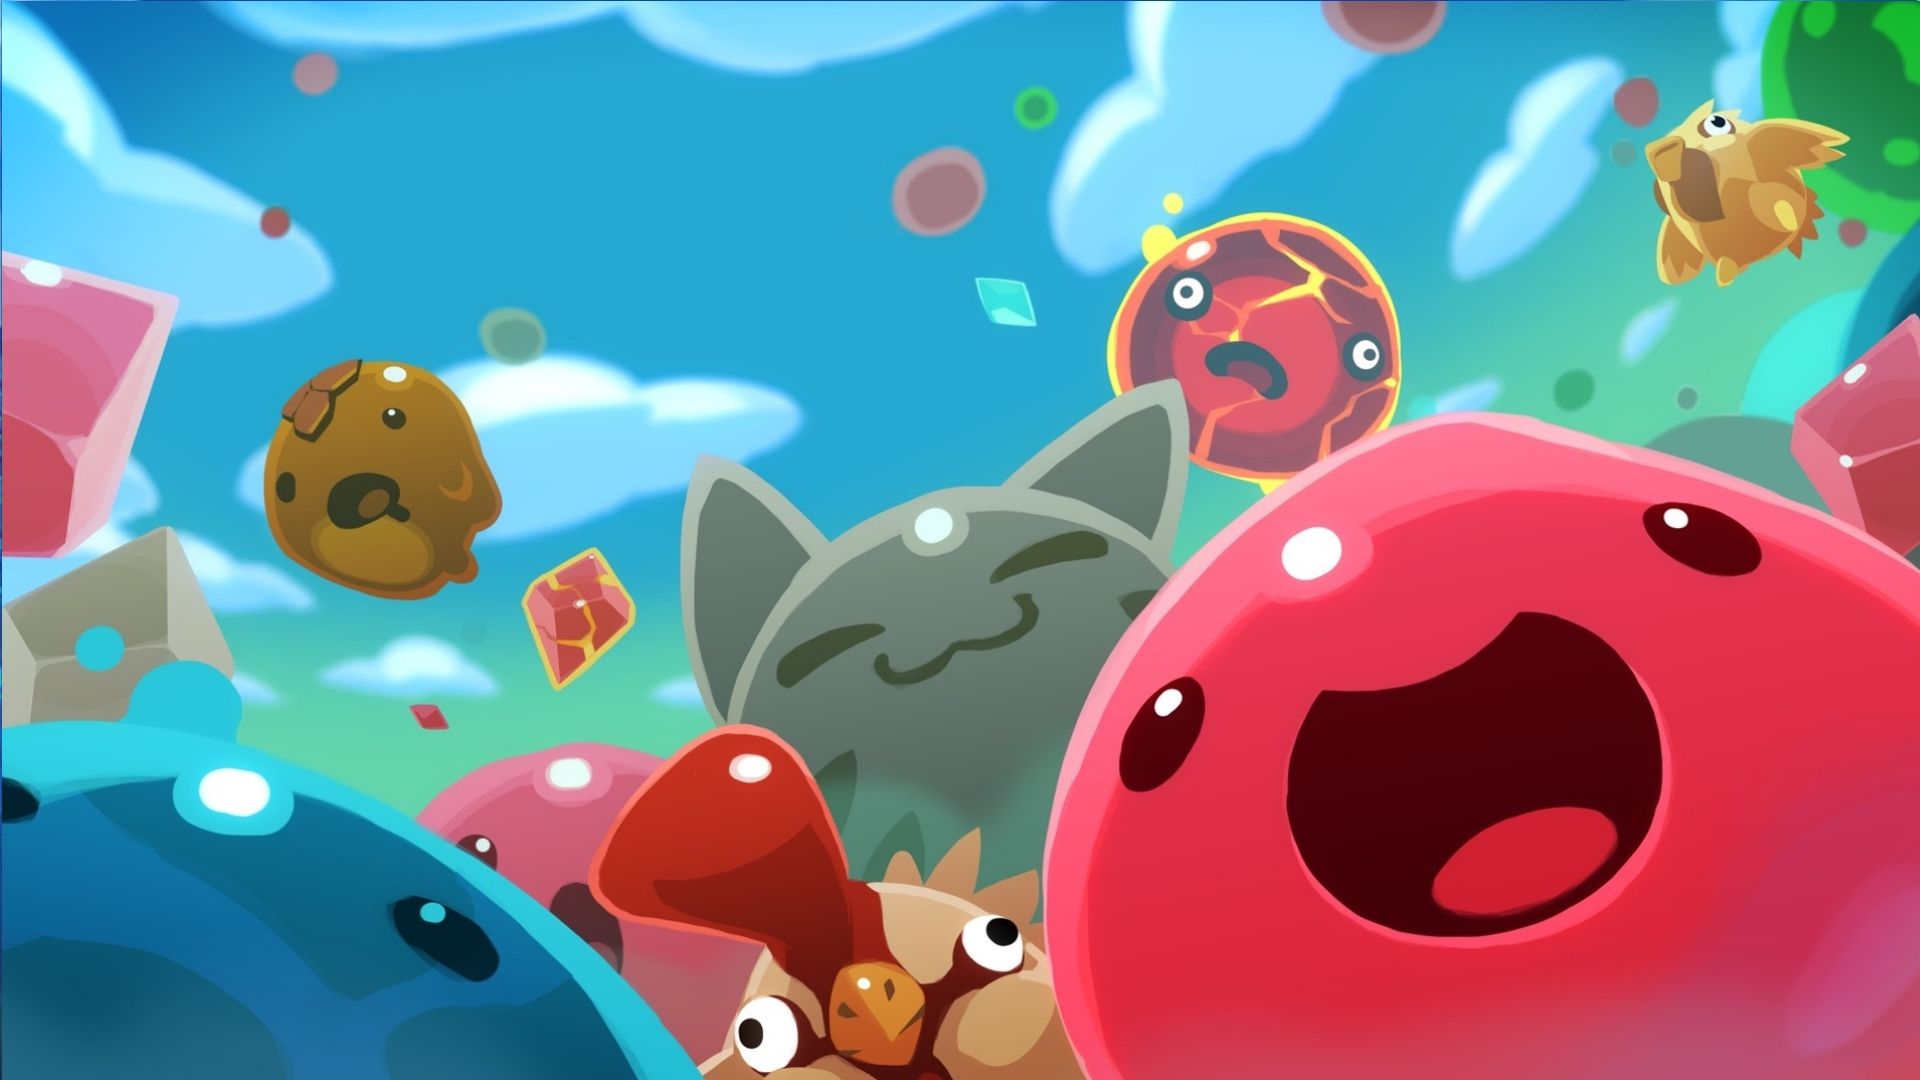 Slime Rancher 2: Where to Find Phosphor Slimes